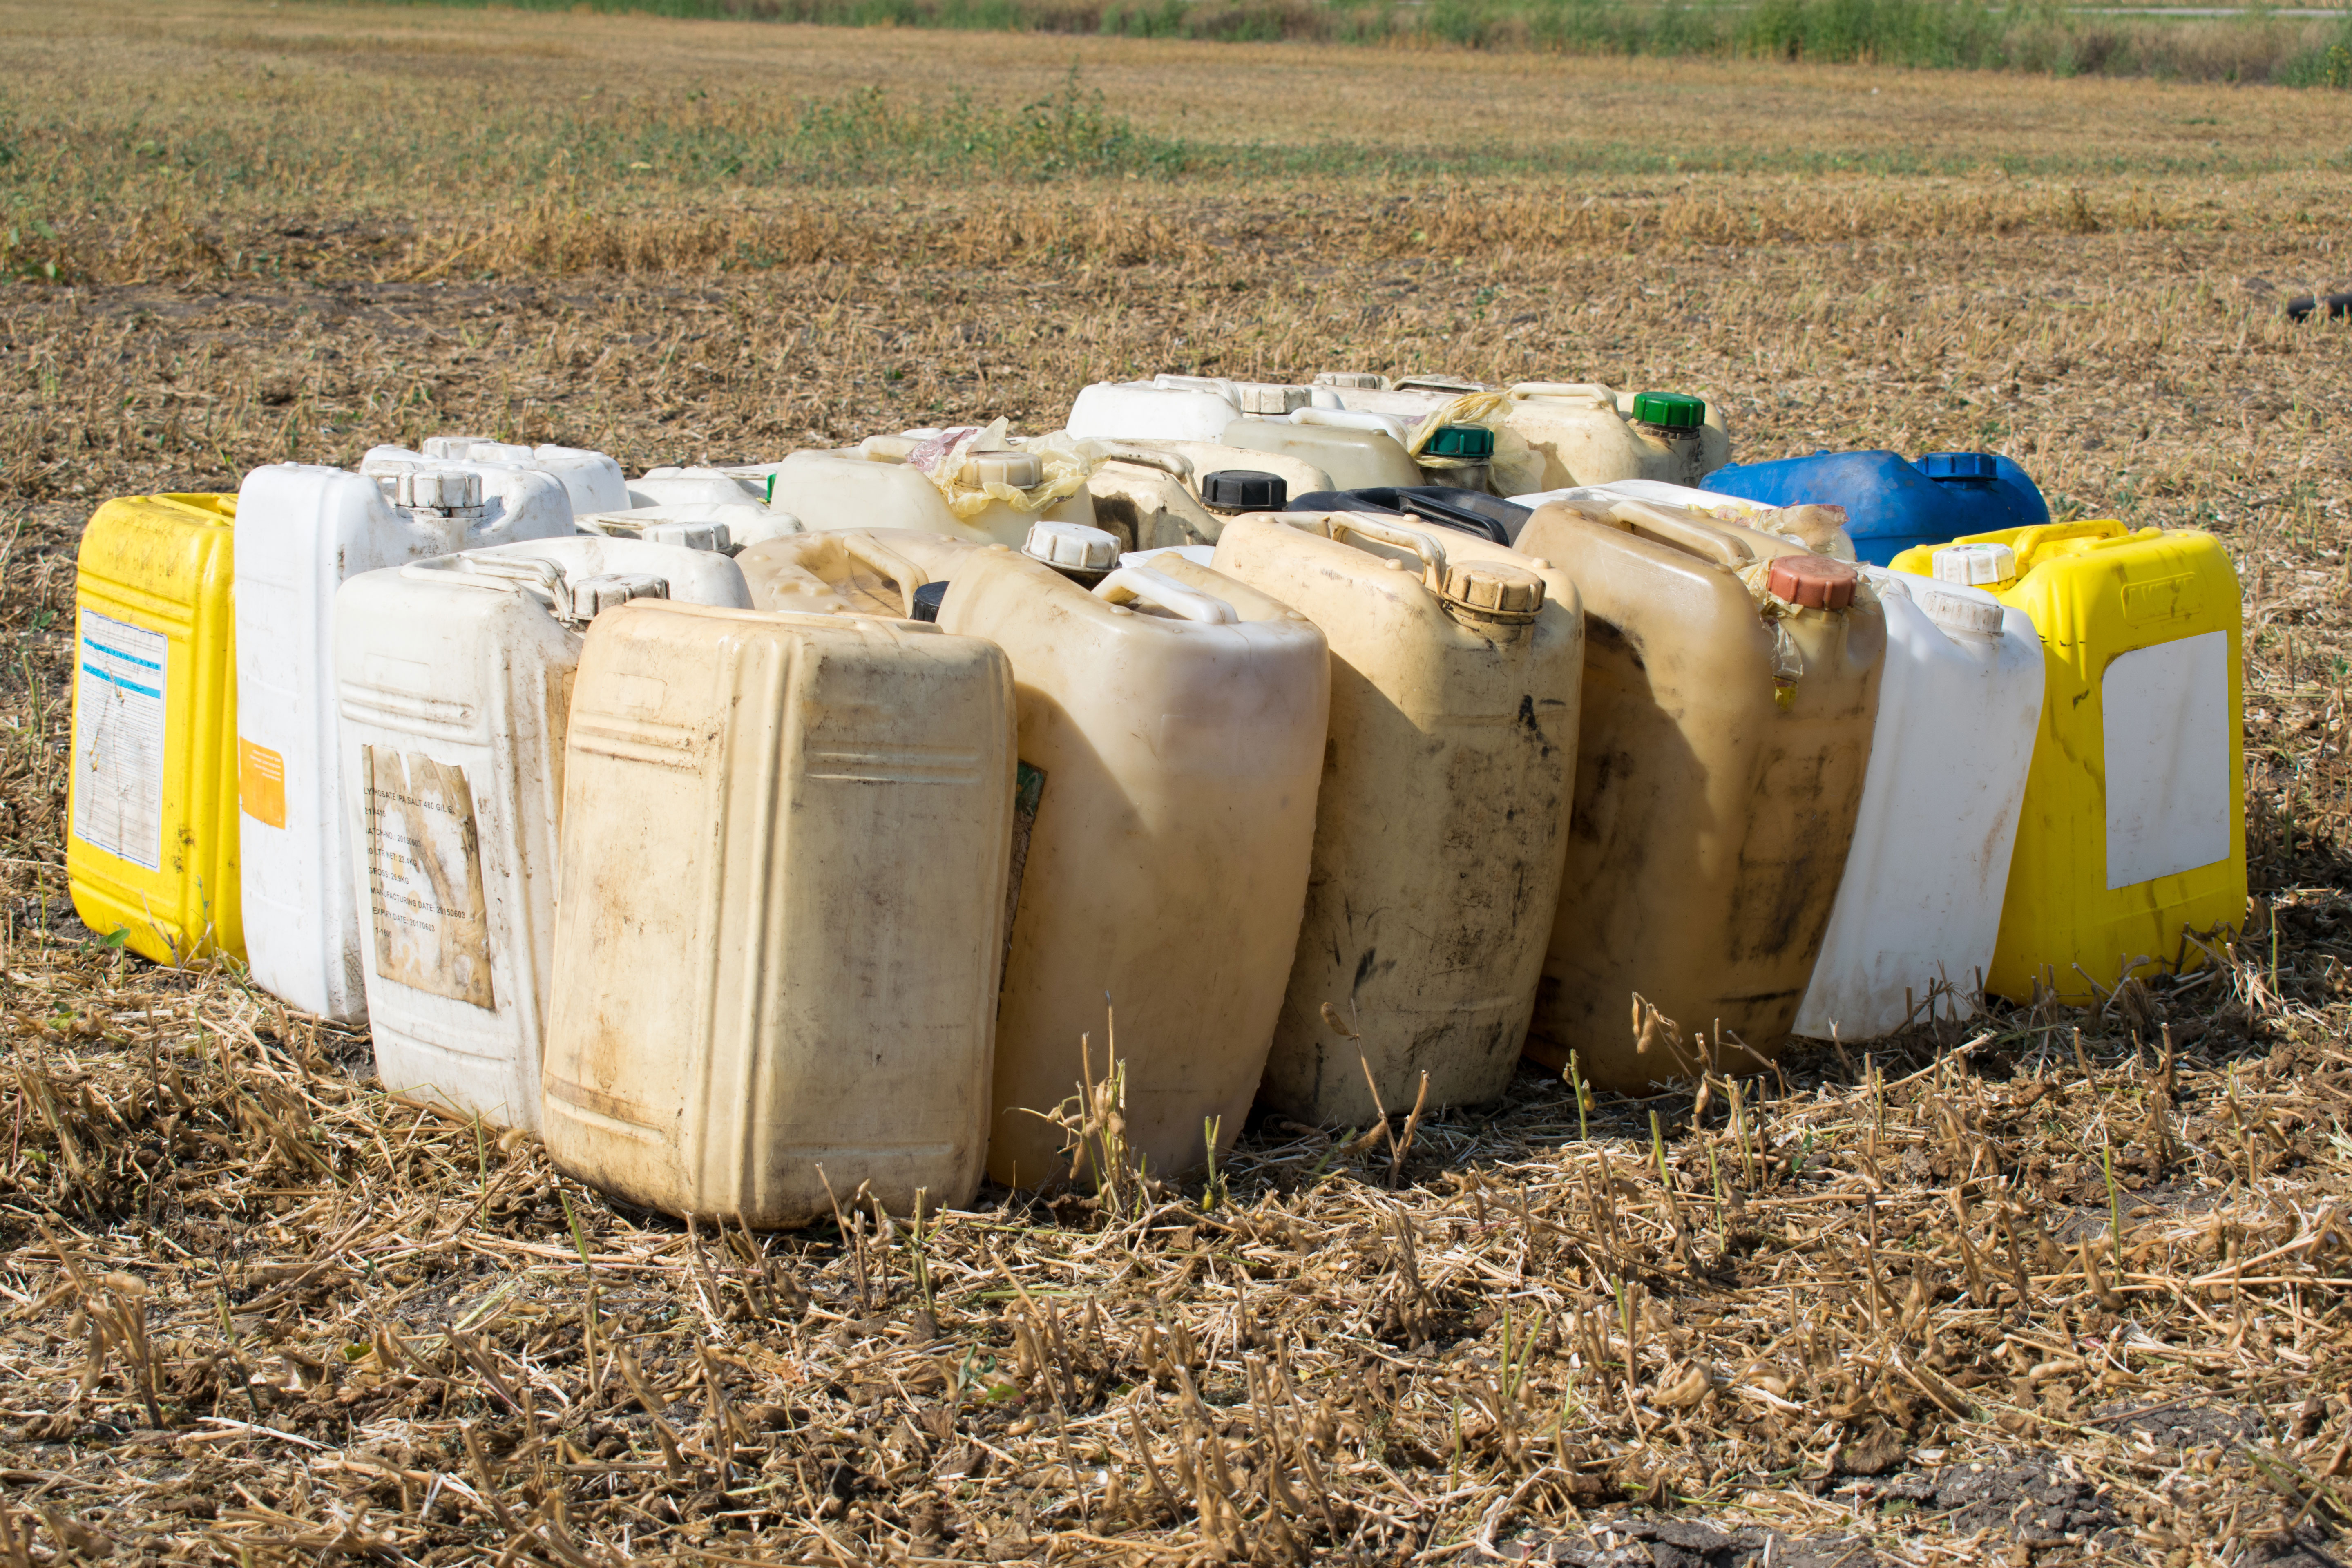 A collection of empty pesticide and herbicide containers.